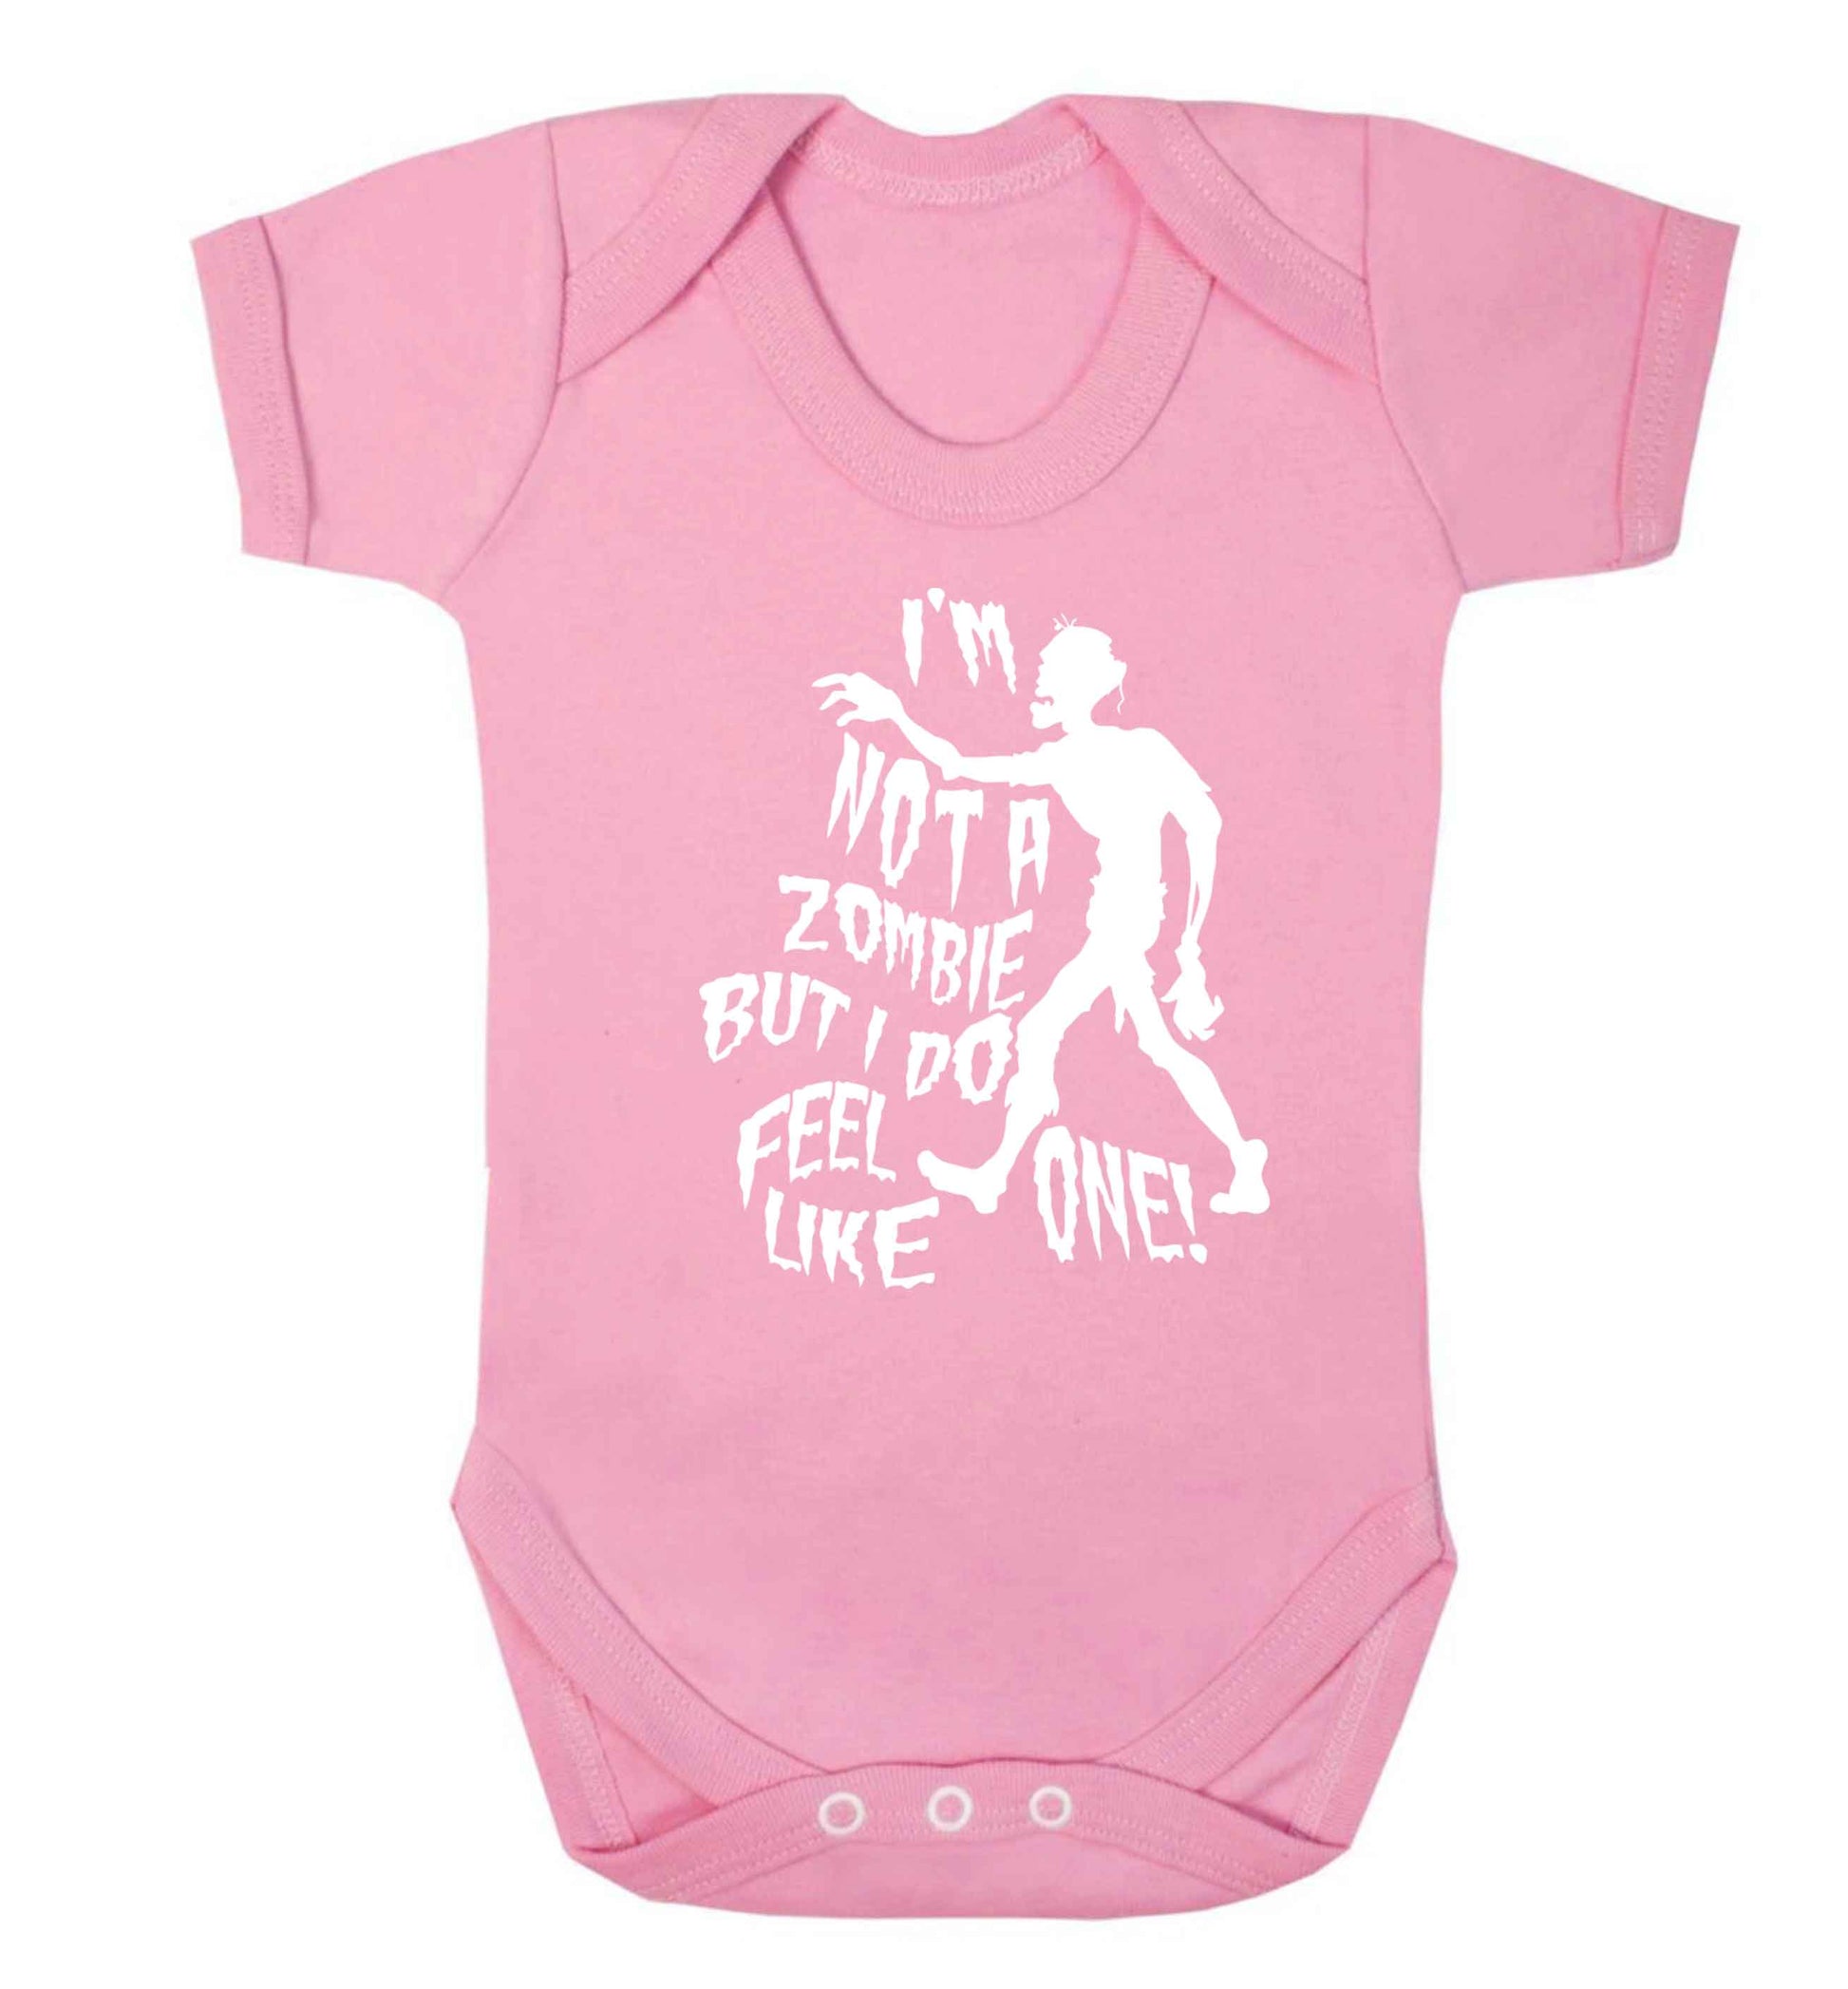 I'm not a zombie but I do feel like one! Baby Vest pale pink 18-24 months